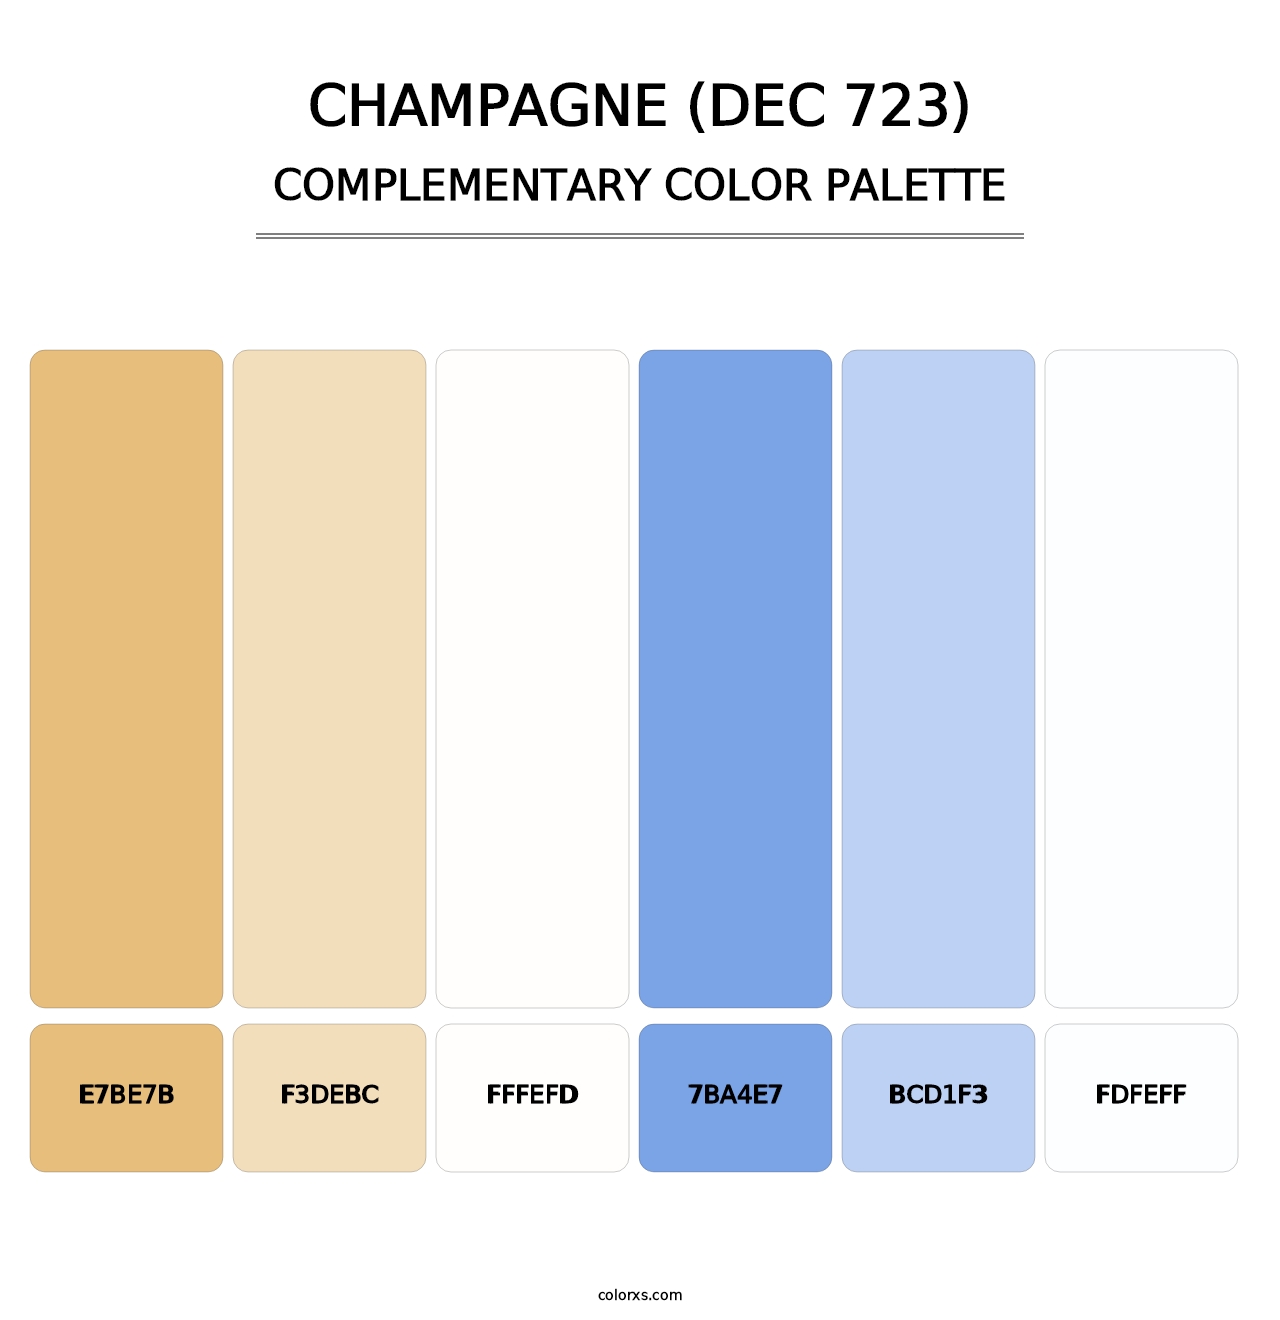 Champagne (DEC 723) - Complementary Color Palette